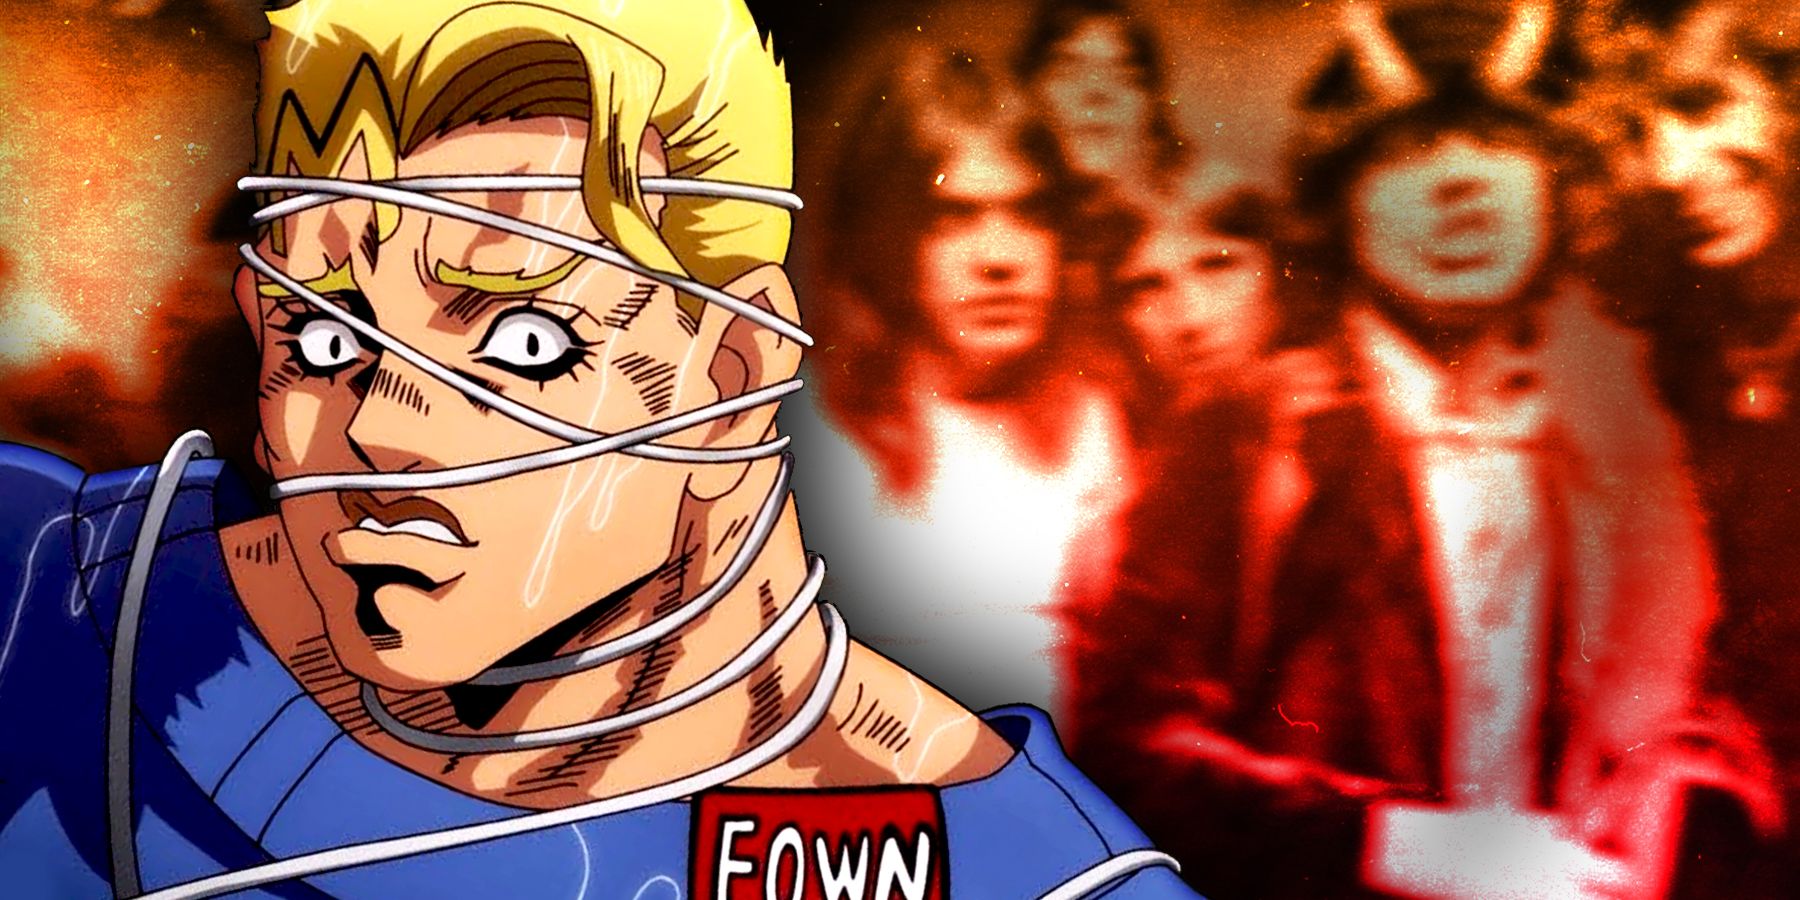 Thunder McQueen of JoJo's Bizarre Adventure in front of a blurred group shot of band ACDC